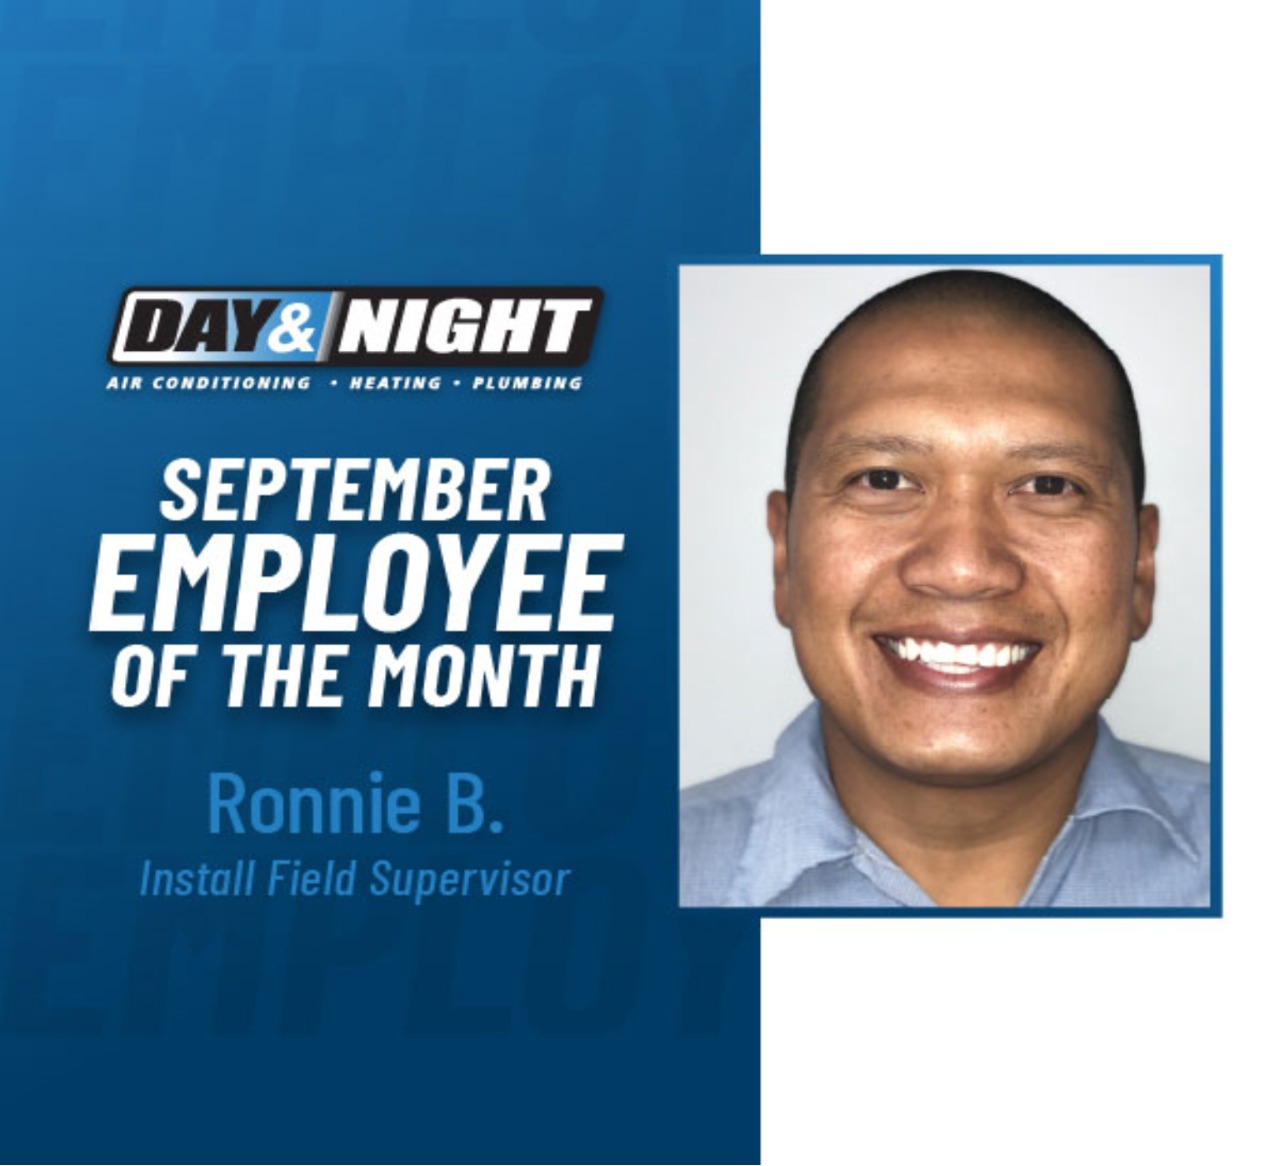 Employee of the month Day & Night Air